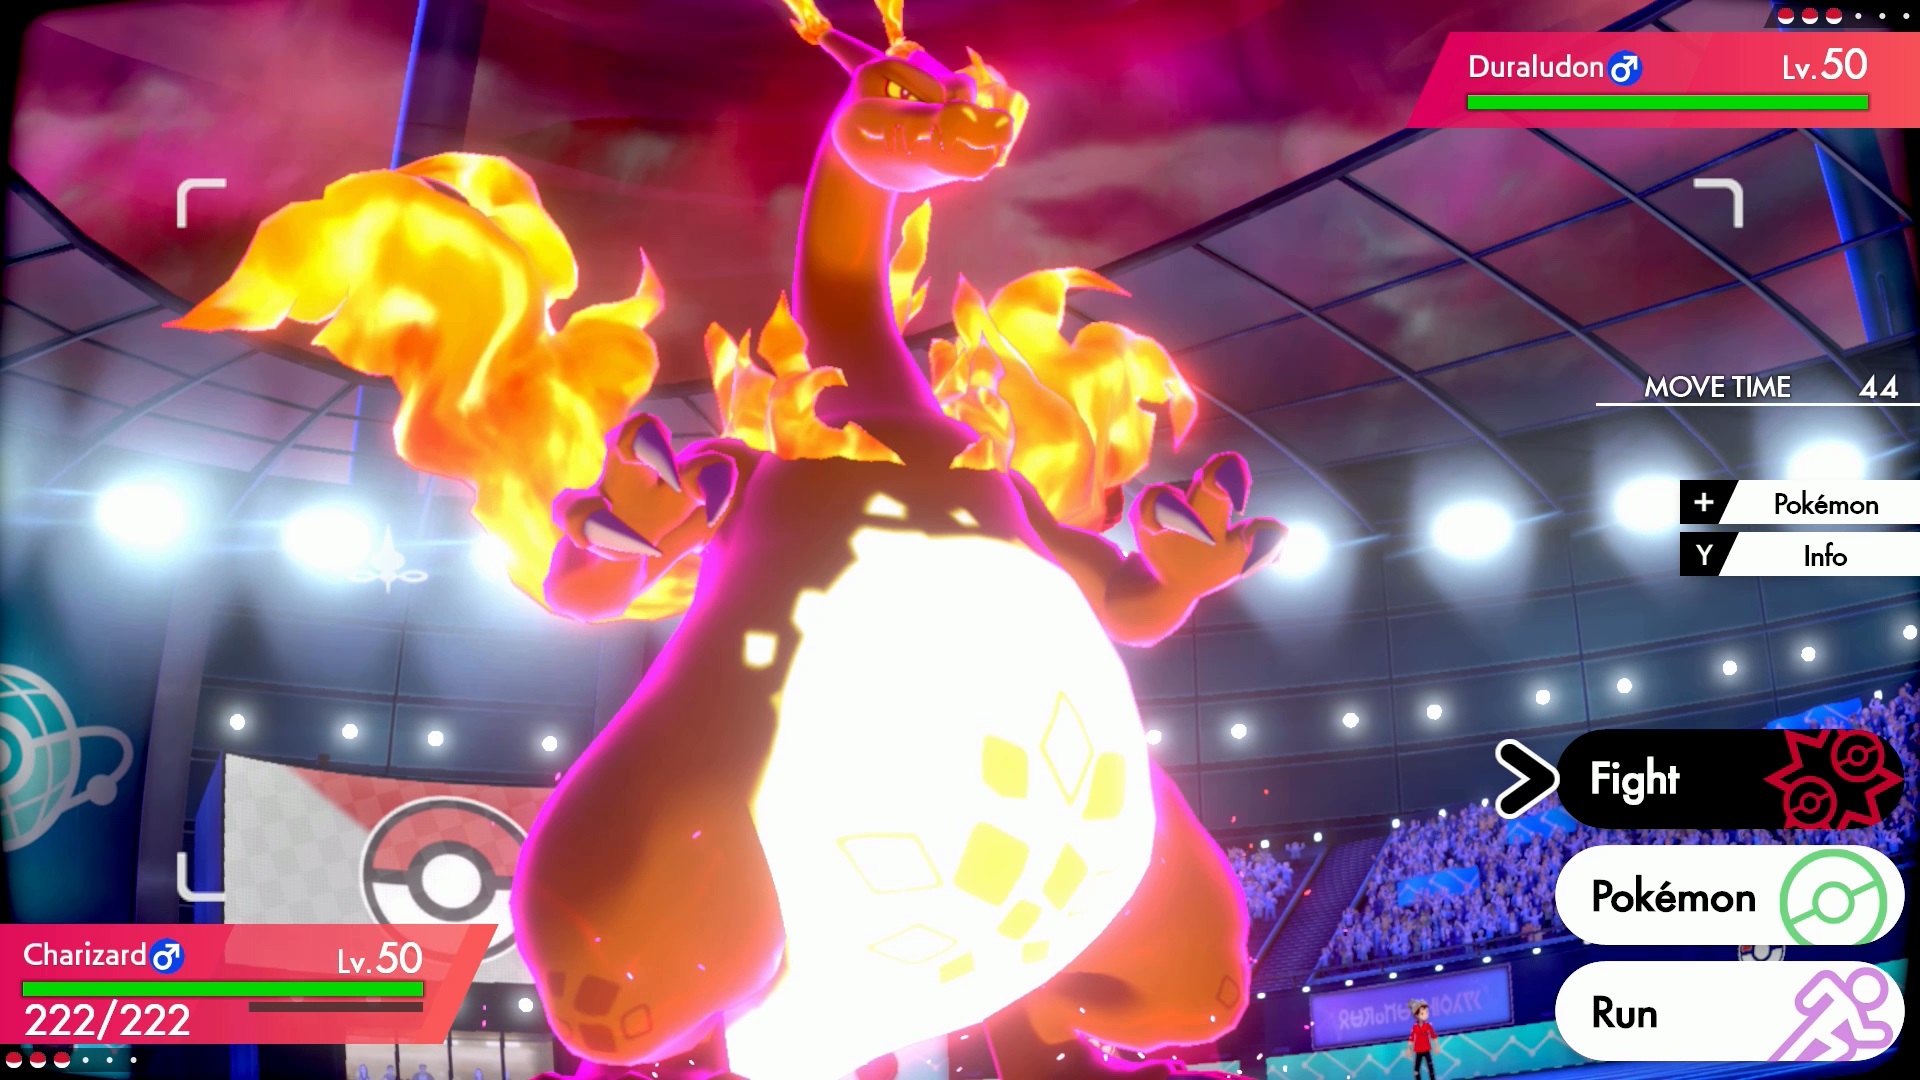 Global Exhibition Champion’s Charizard Being Distributed to Pokemon Sword and Shield